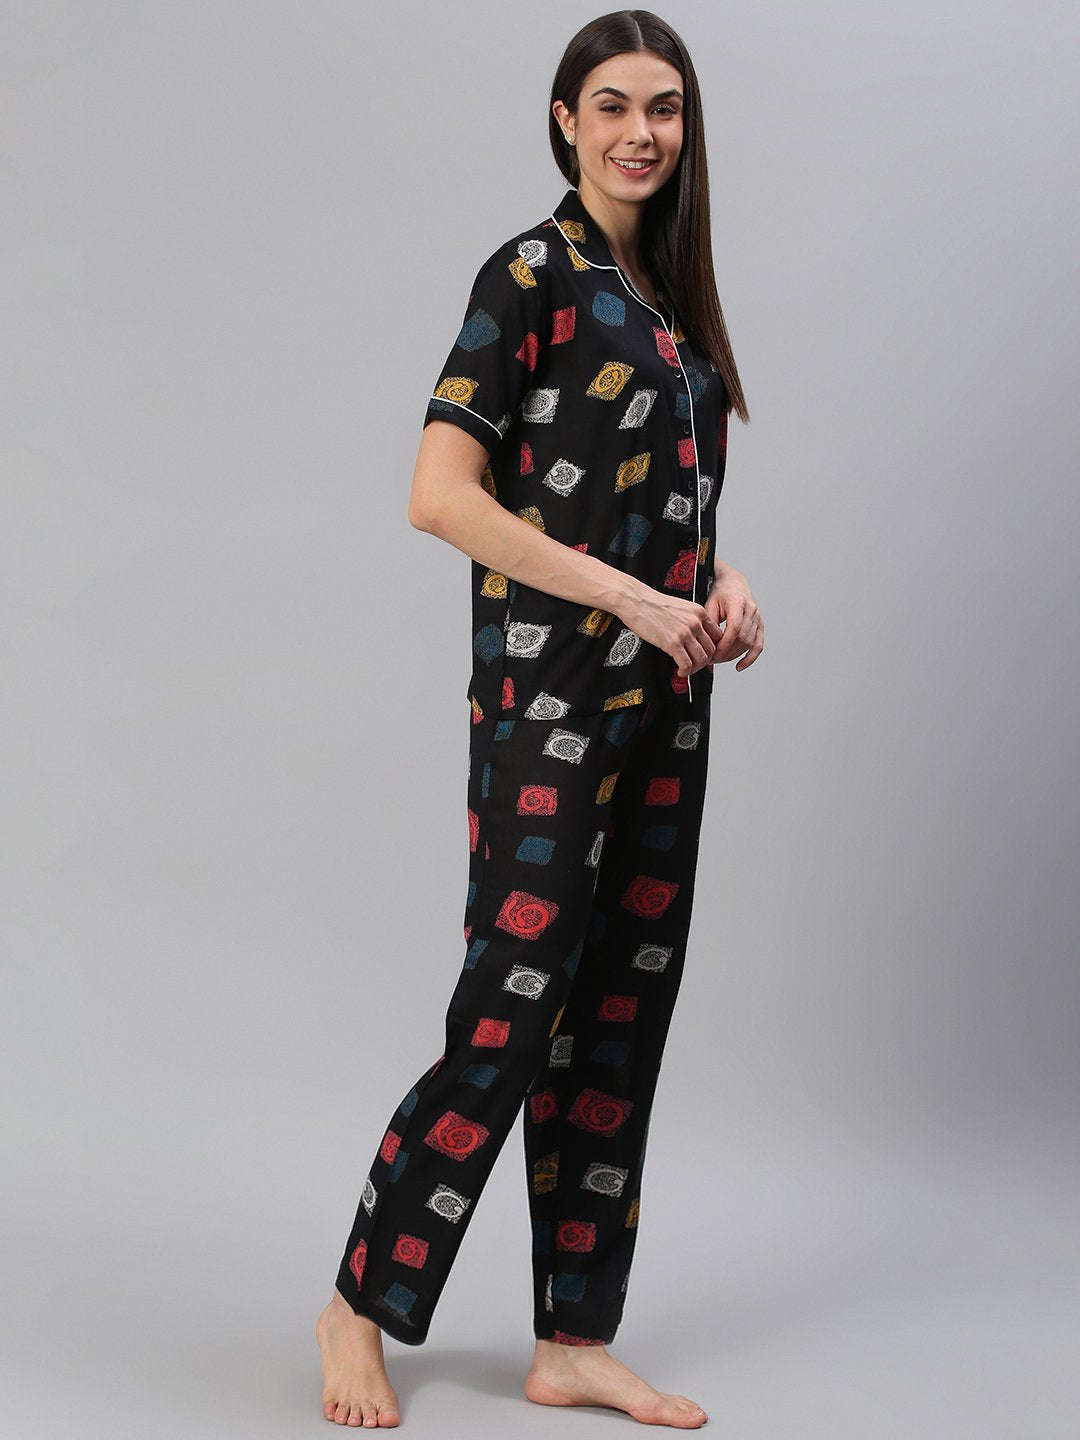 Cation Black Printed Night Suit